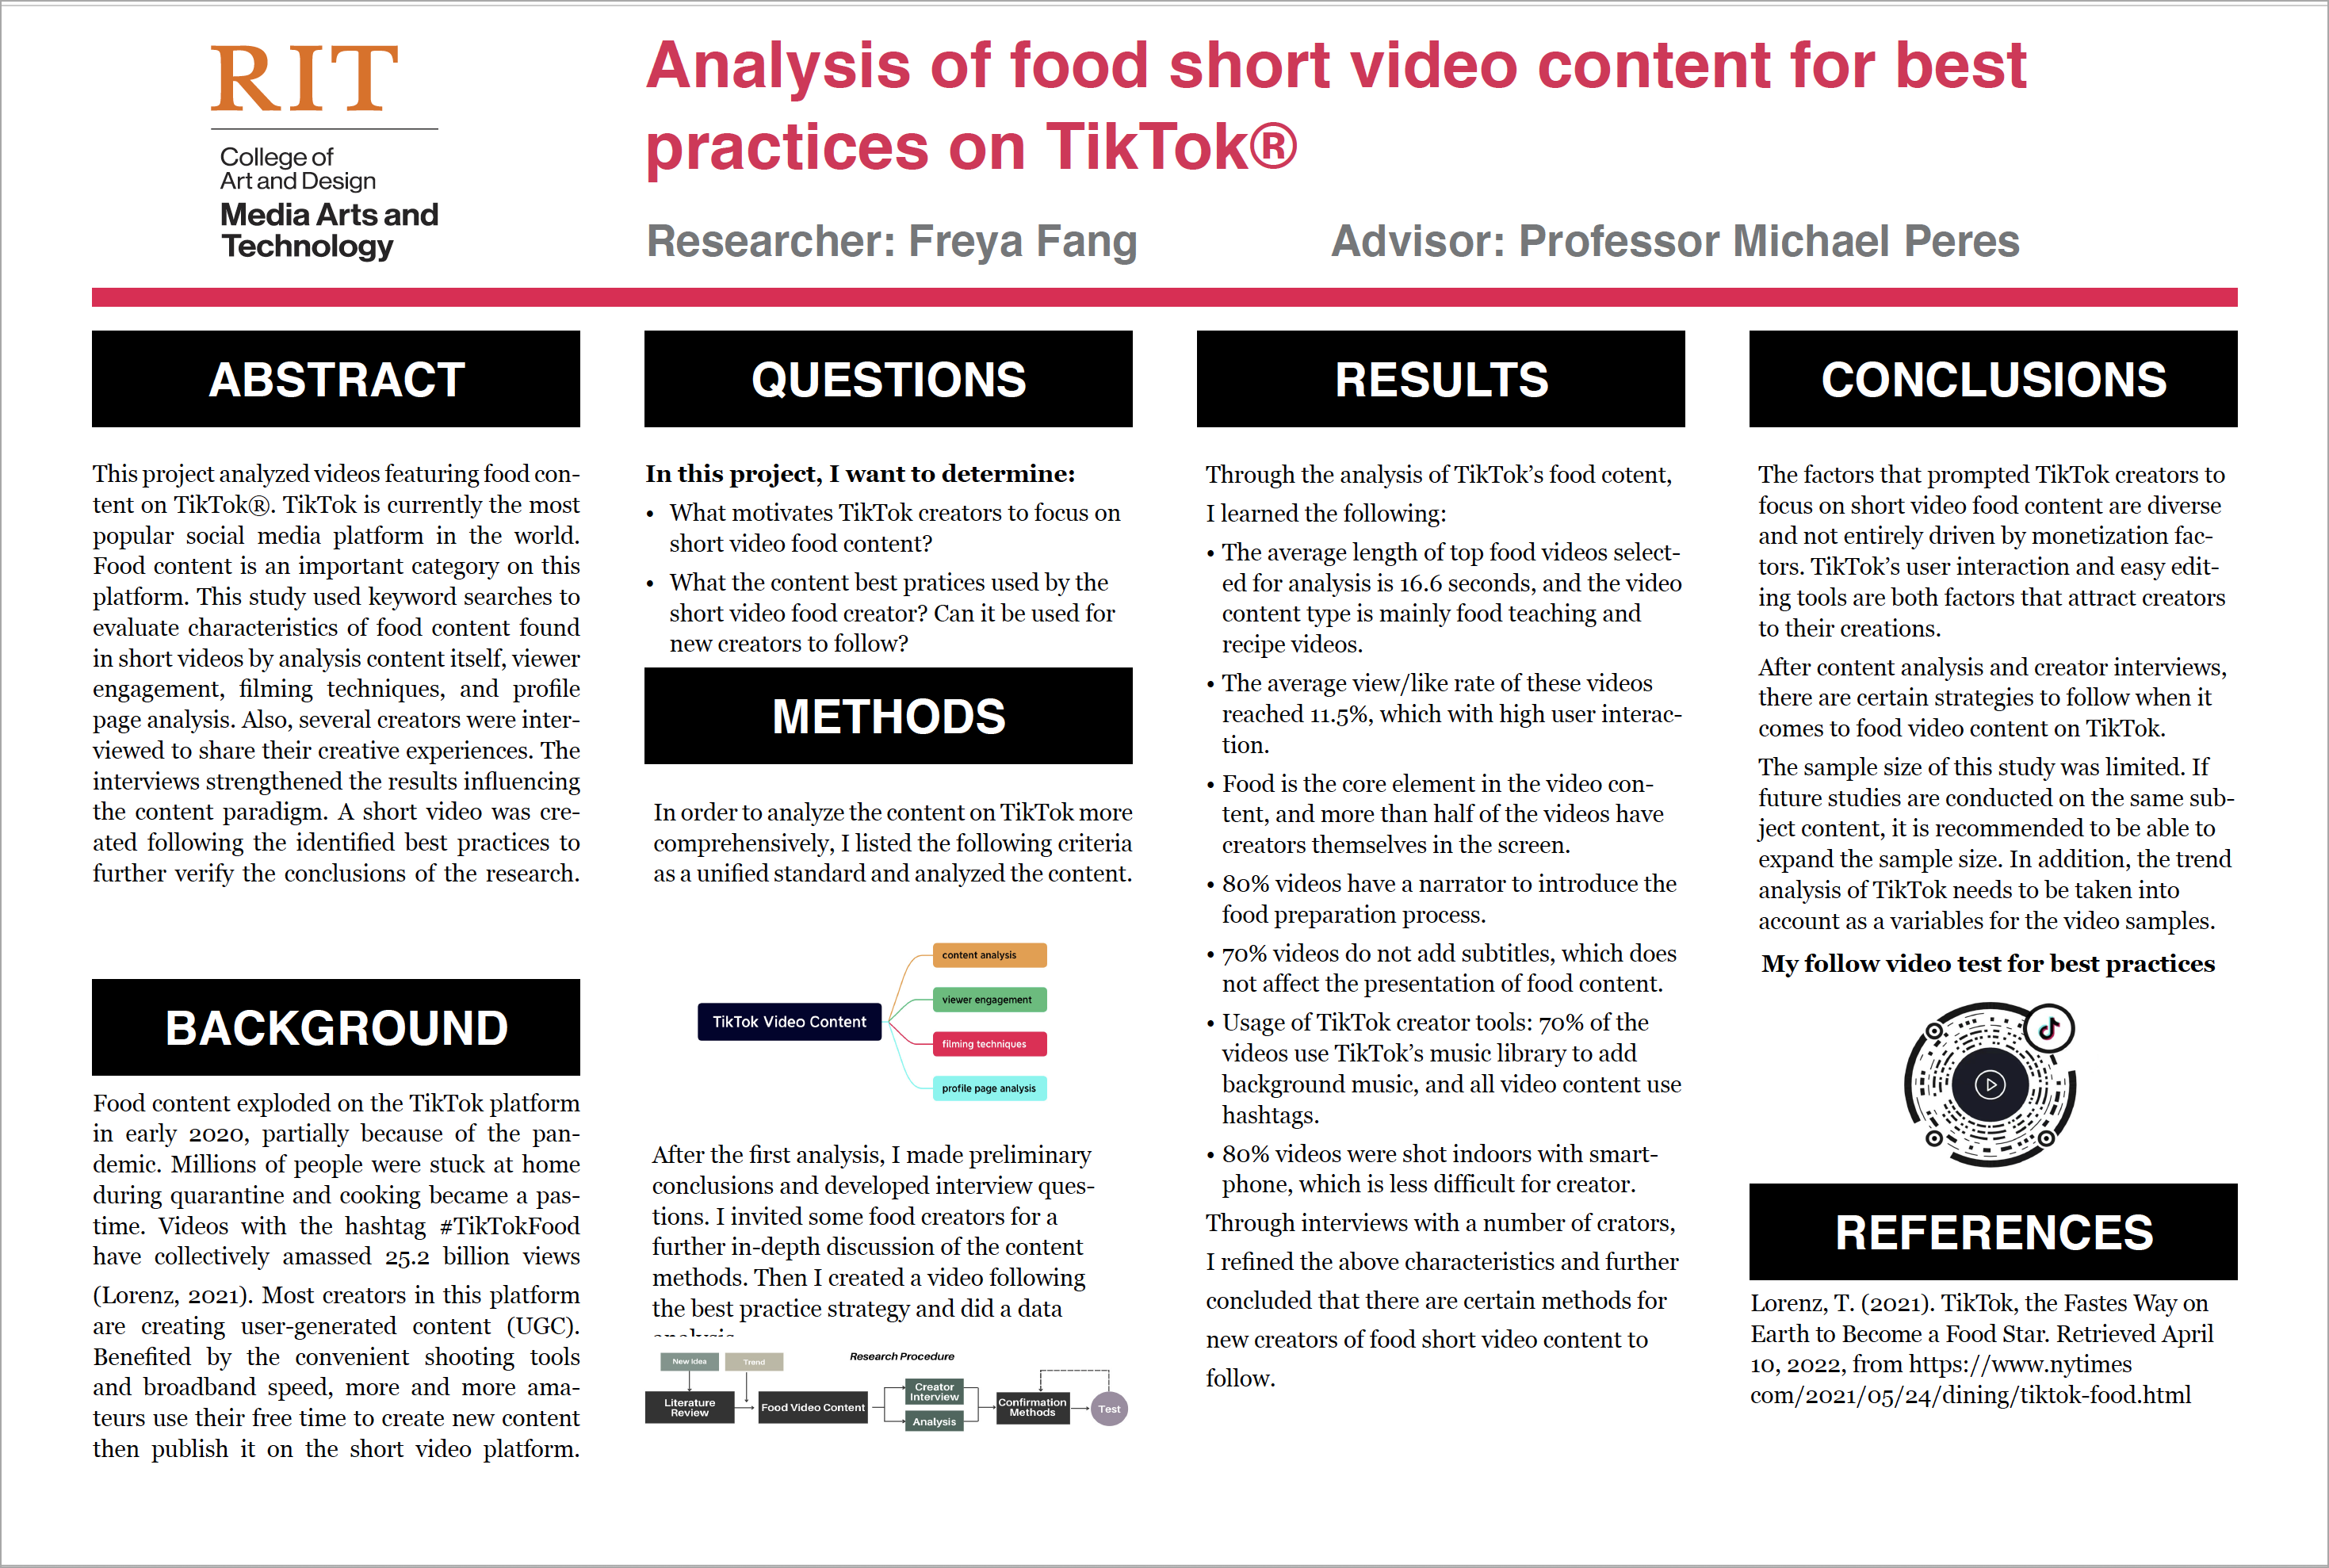 A poster highlighting research on analysis of food short video content for best practices on TikTok.